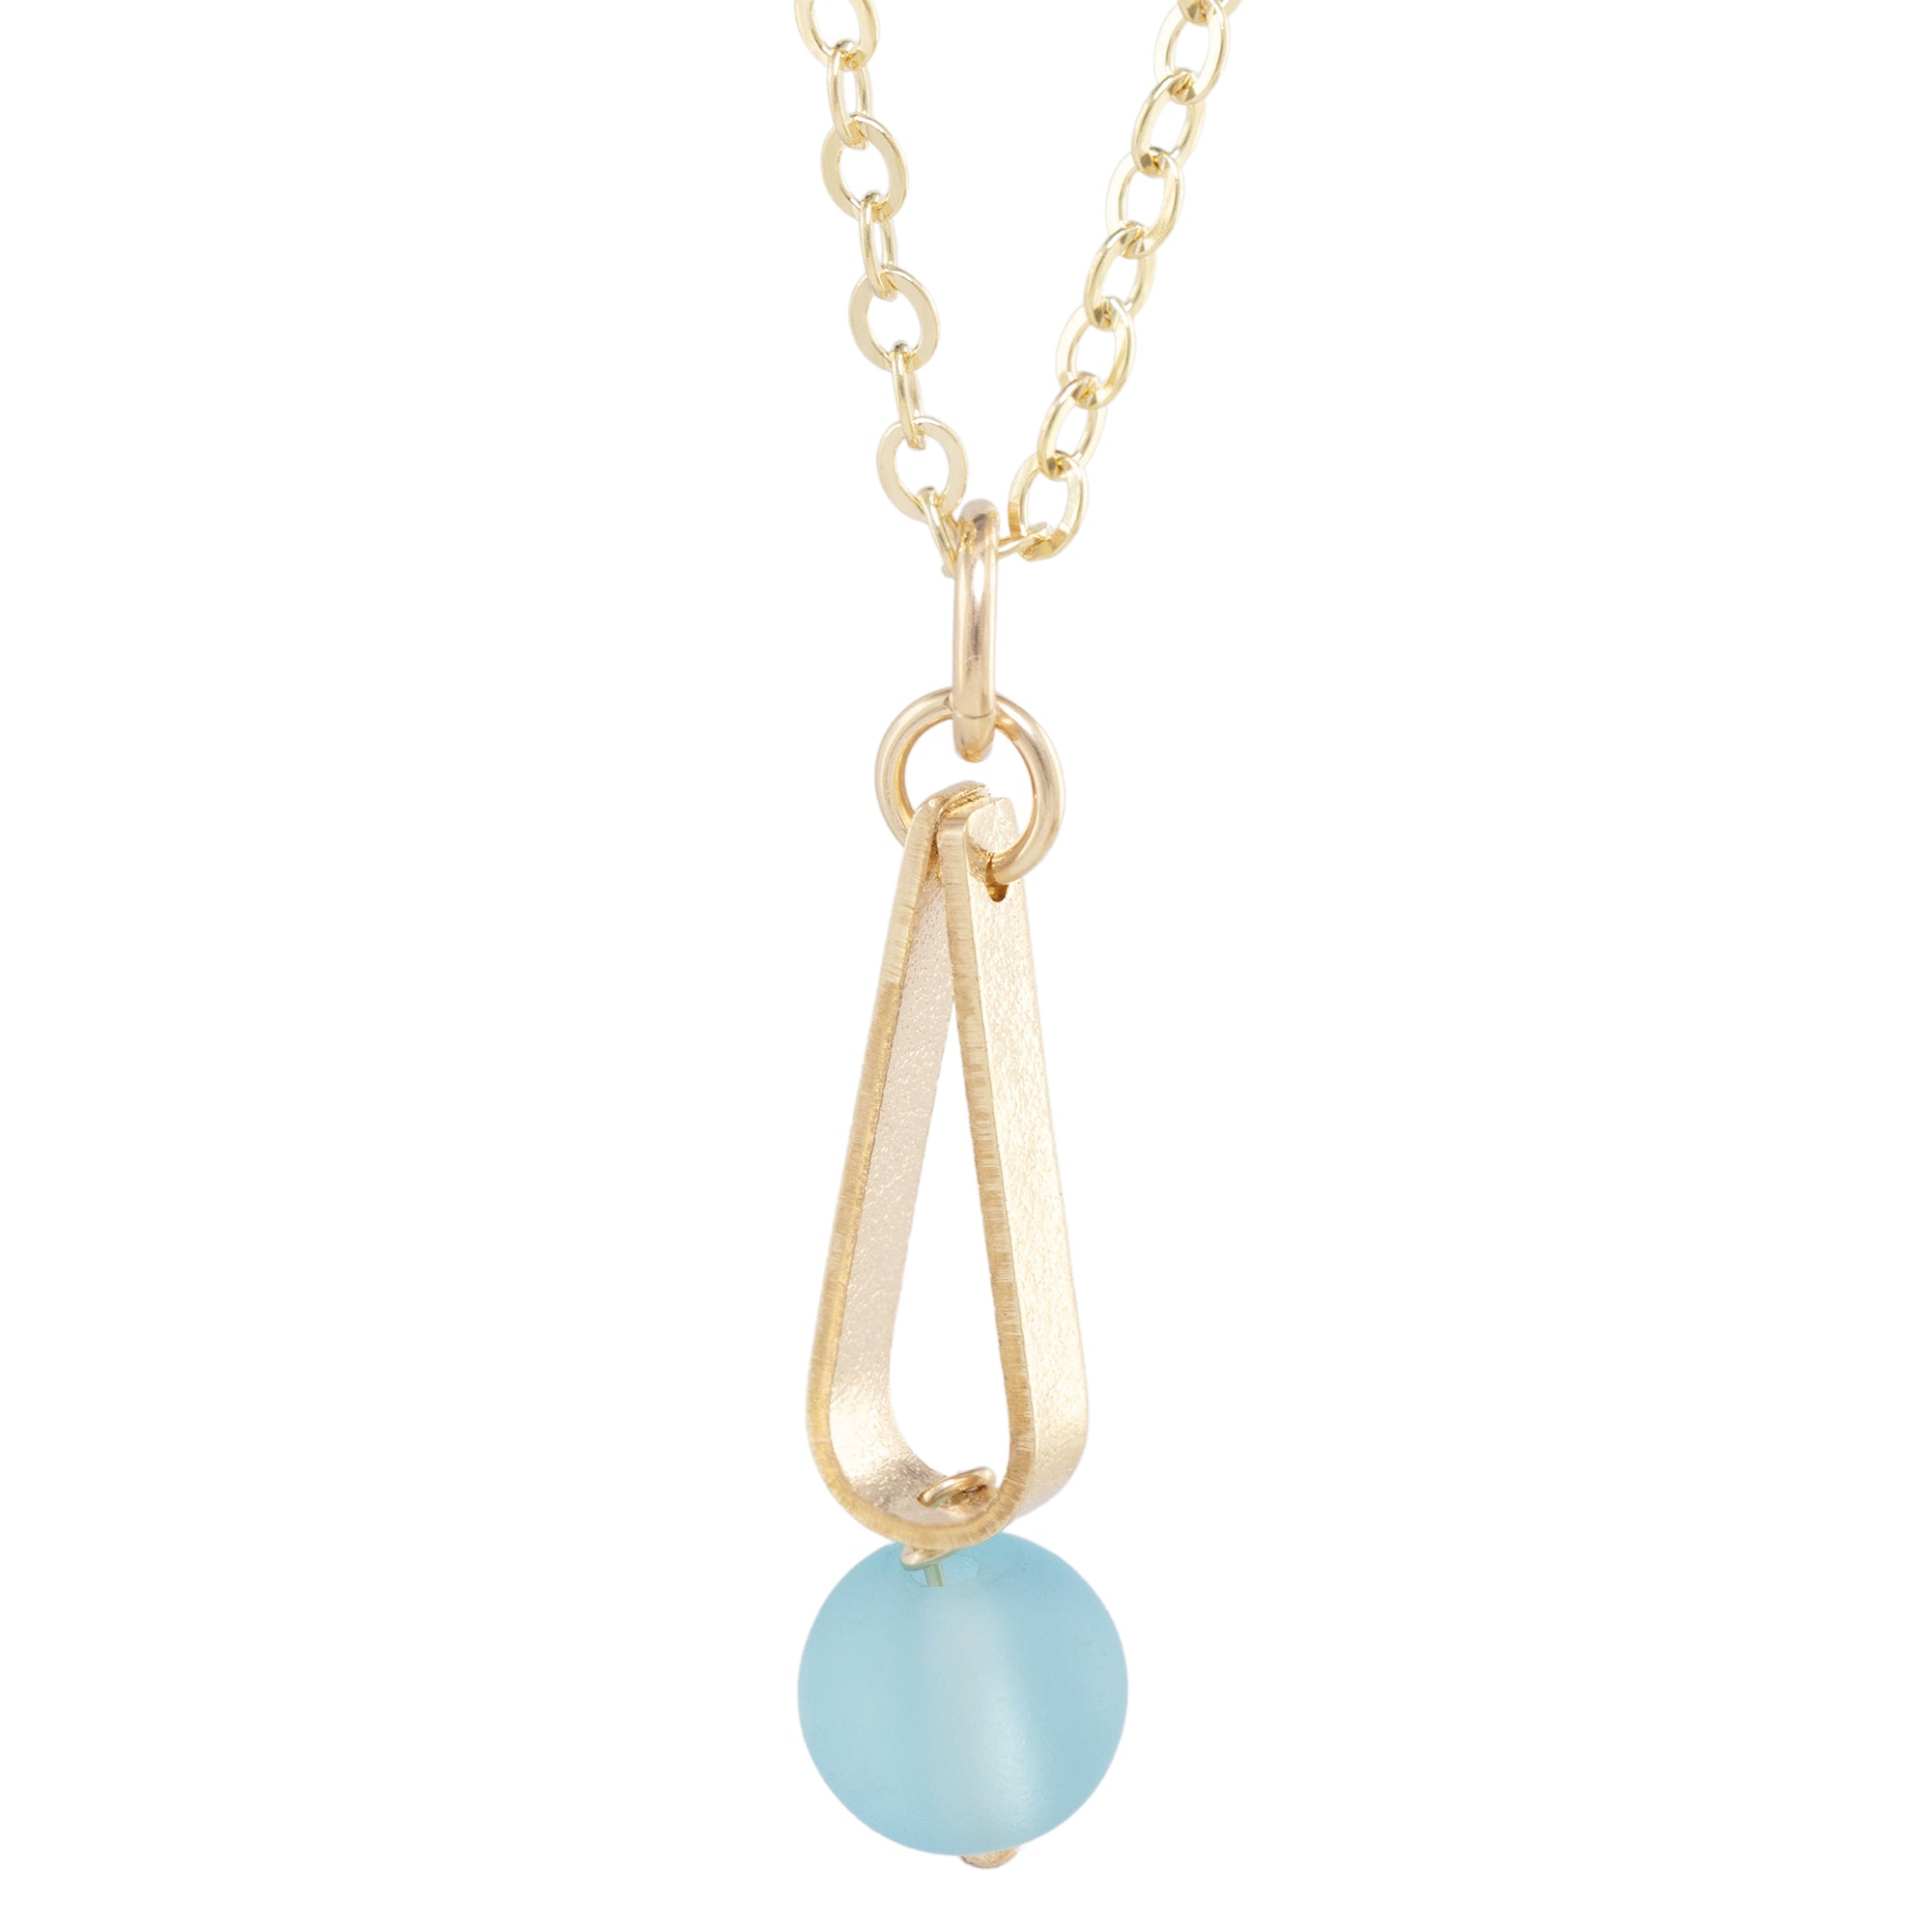 Light Baby Blue Round Recycled Glass Ball and 14K Gold Fill Teardrop Shaped Pendant Necklace